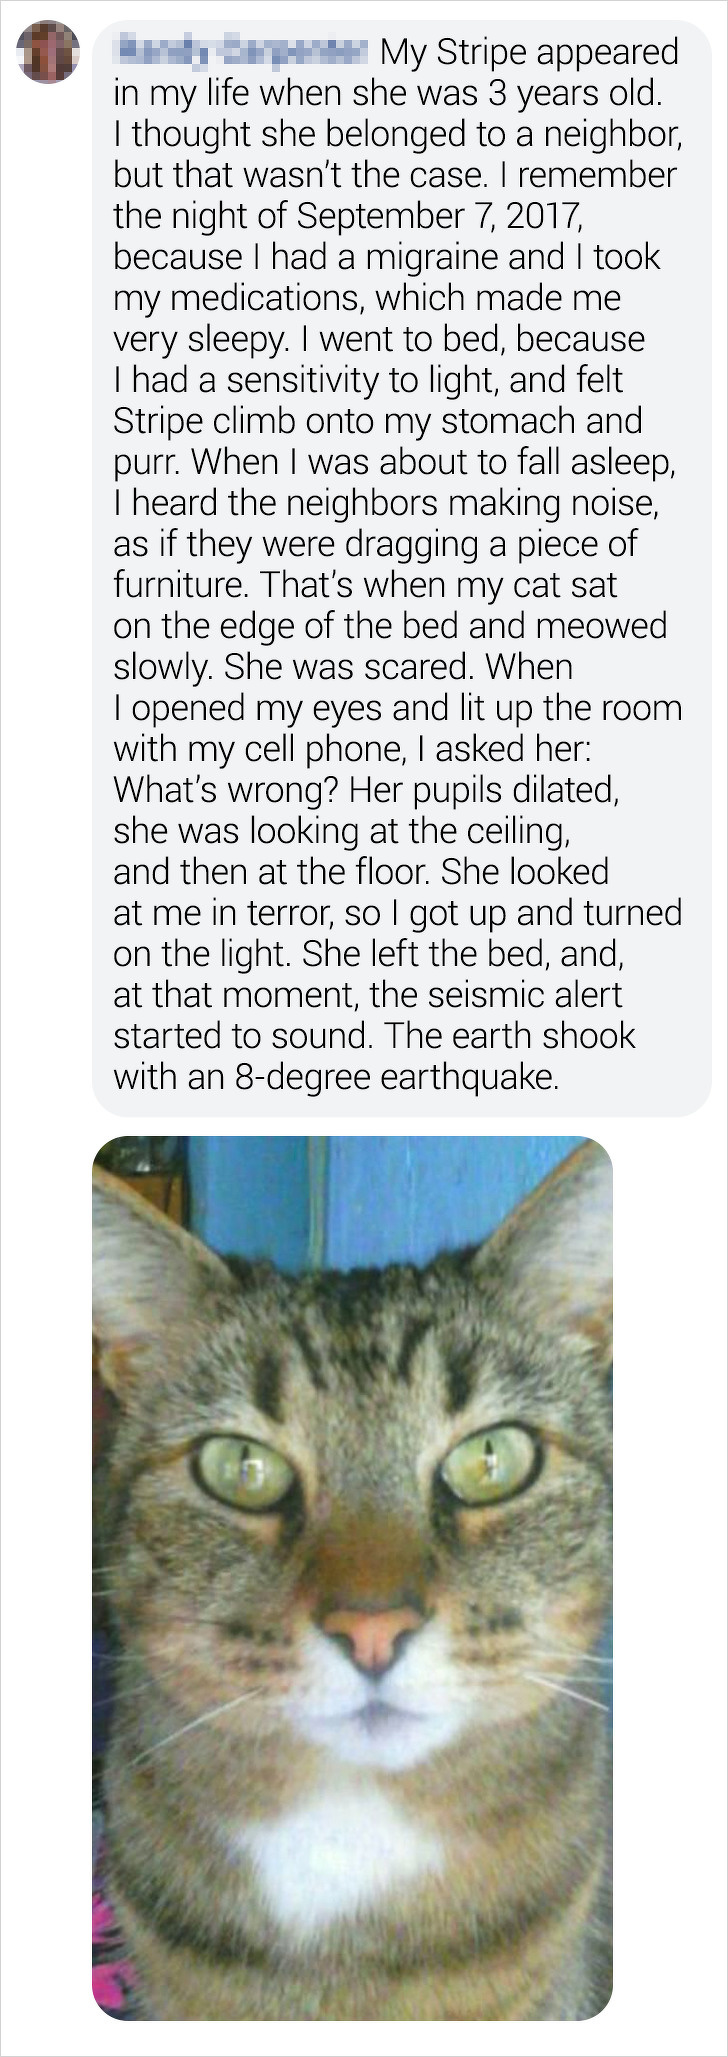 18 Bright Side Readers Shared How Their Pets Became Heroes When Danger Was Close